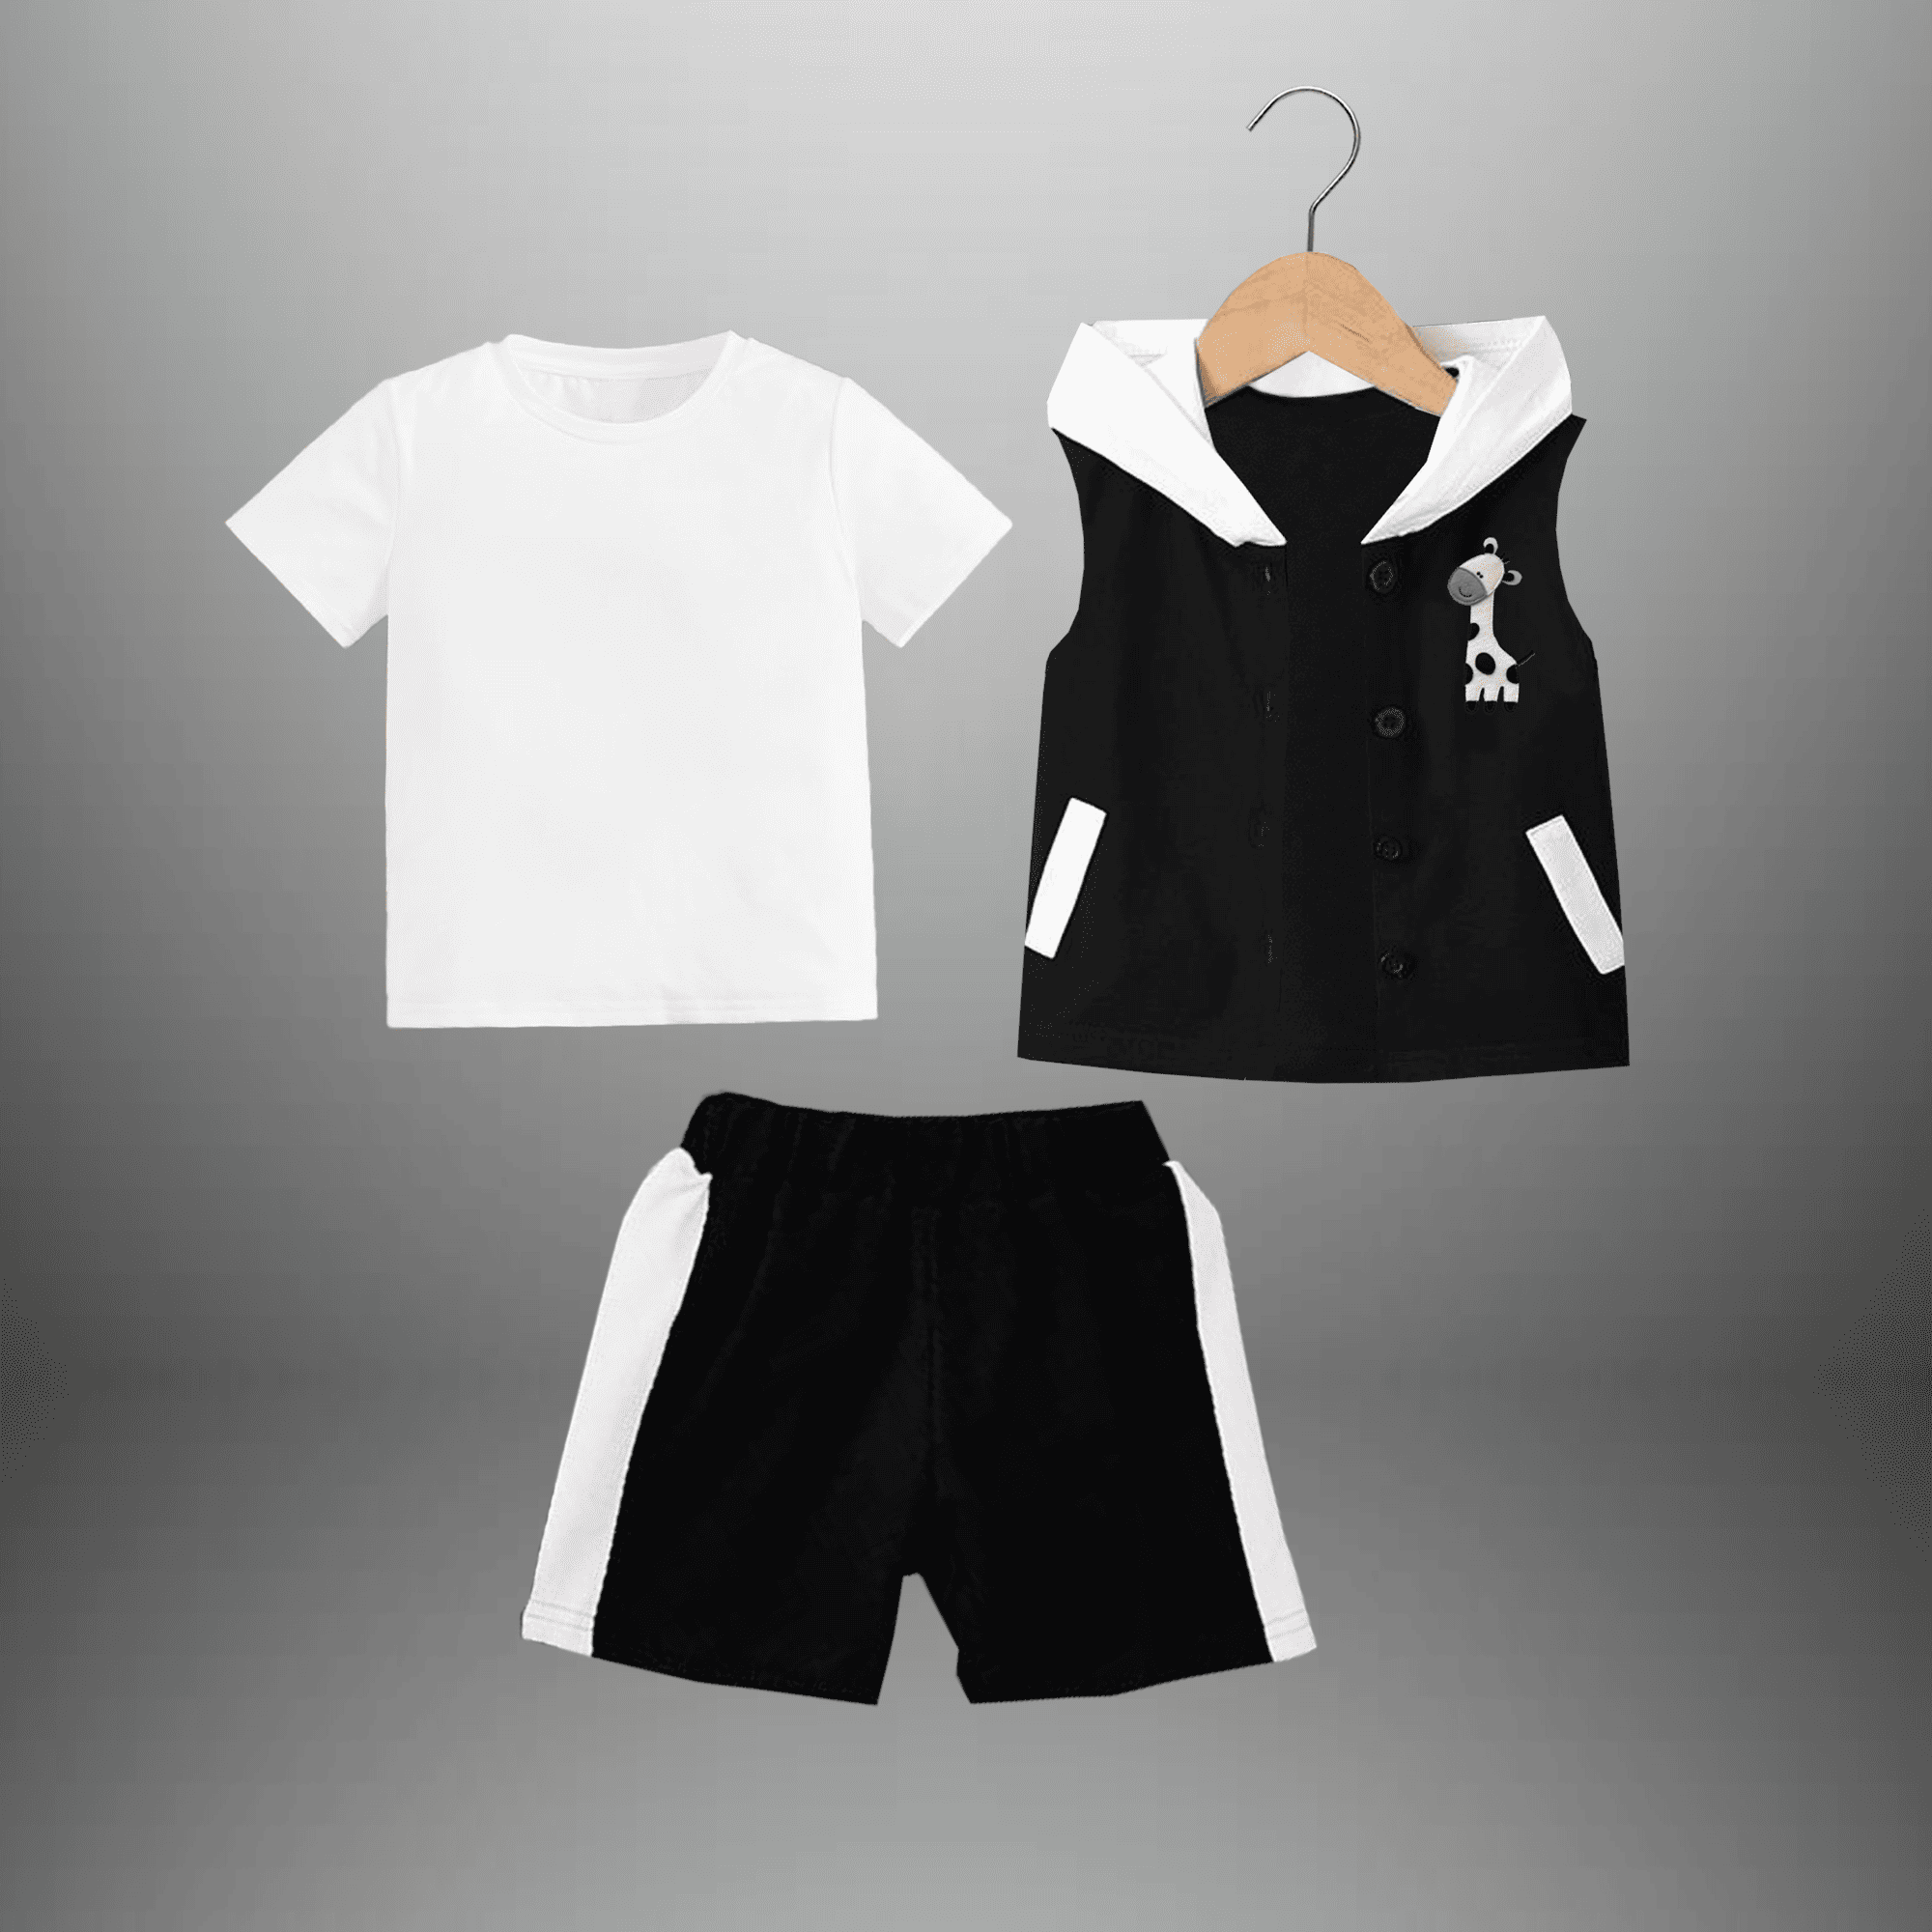 Boy's 3 piece set of Black & white  shorts , Sleeveless hooded jacket wih buttons and T-shirt-RKFCW533